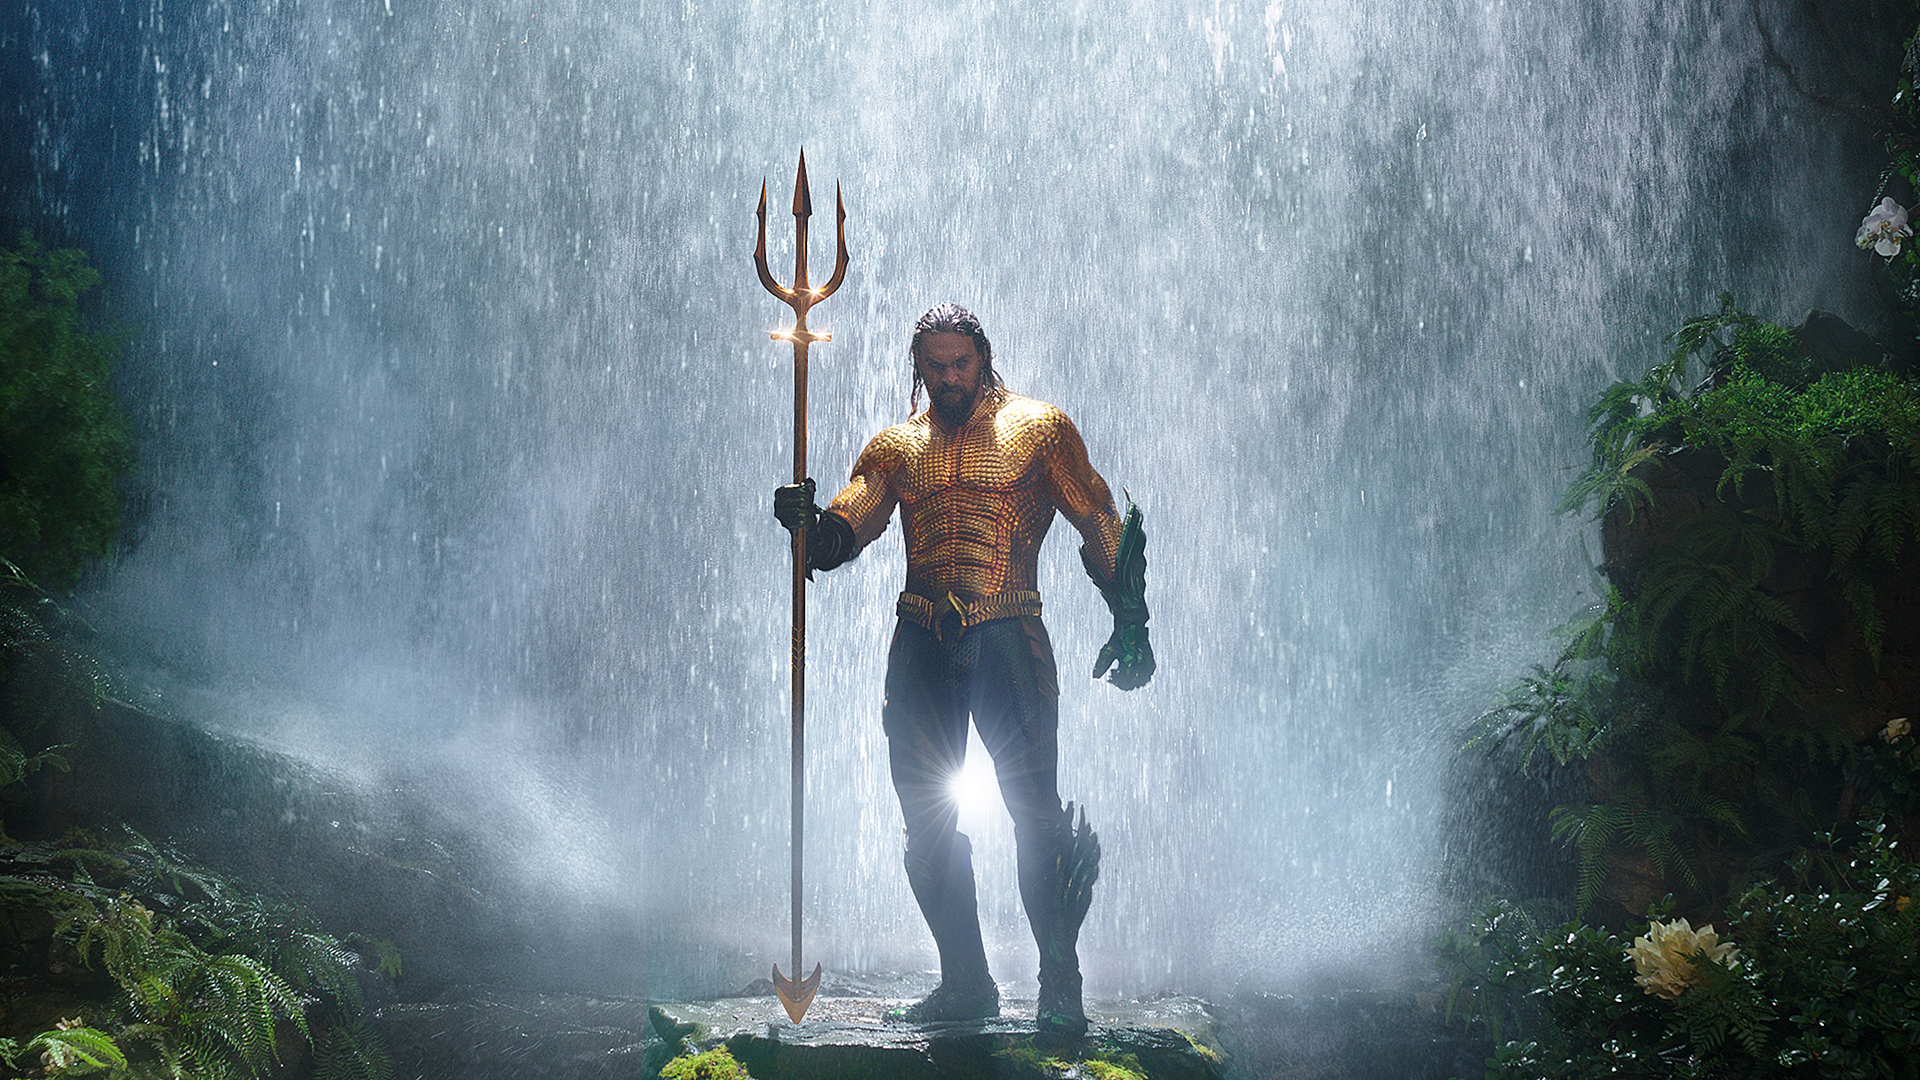 Jason Momoa's Aquaman emerges from a waterfall with his trident and in his classic comic book costume